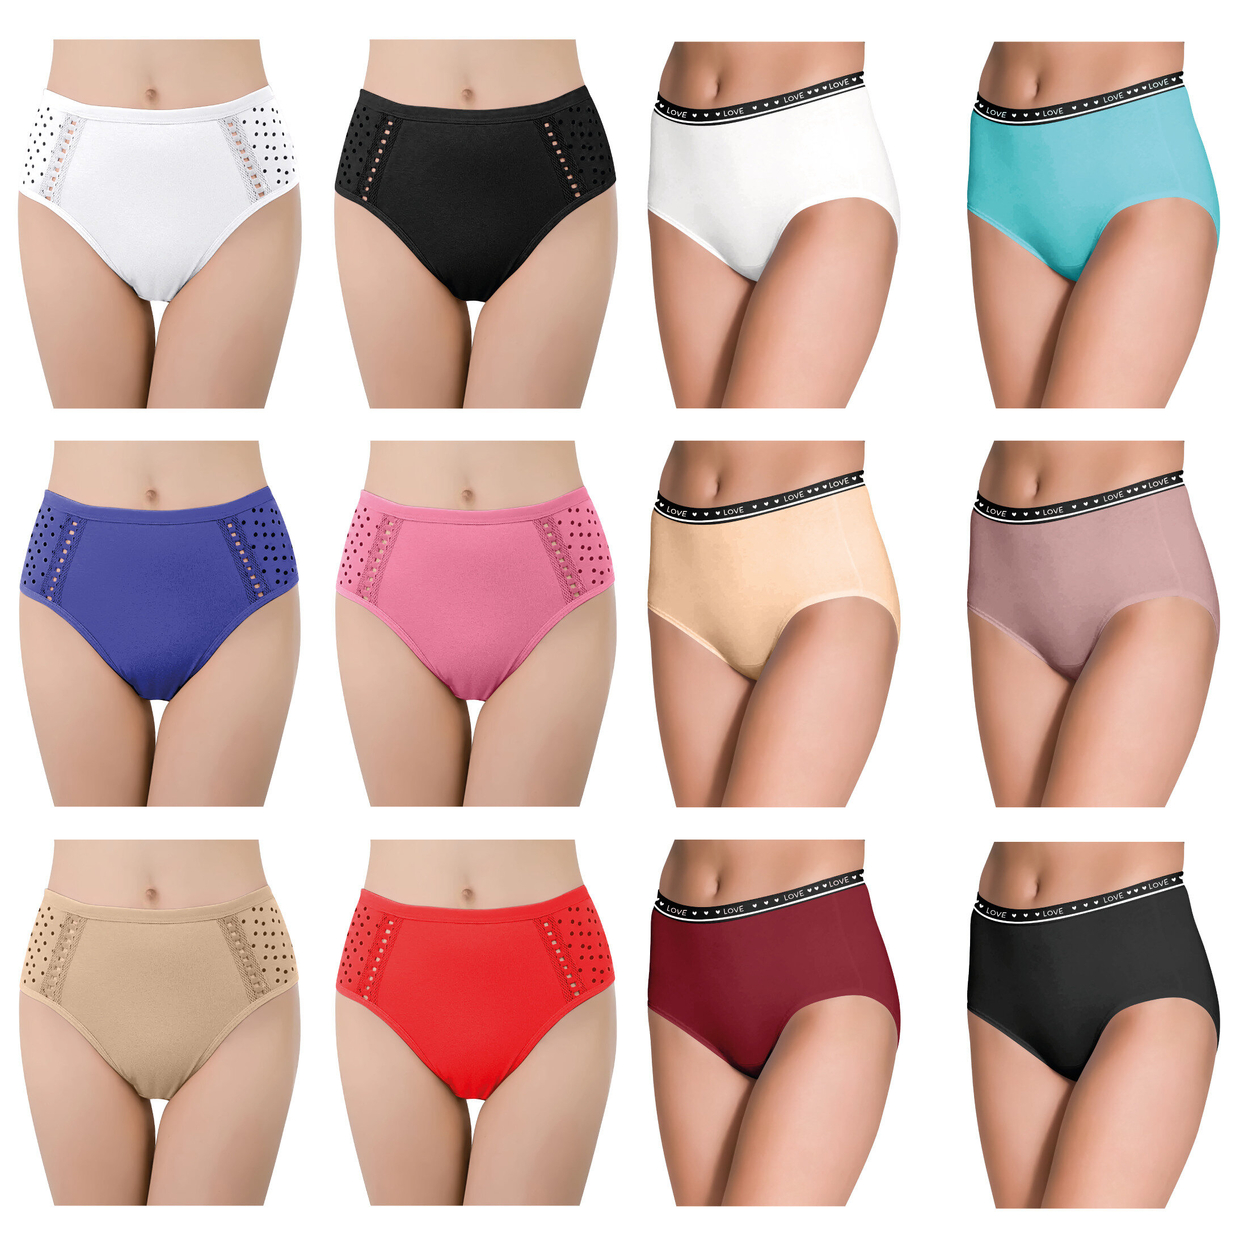 Multi-Pack: Women's Ultra Soft Moisture Wicking Panties Cotton Perfect Fit Underwear (Plus Sizes Available) - 12-Pack, Small